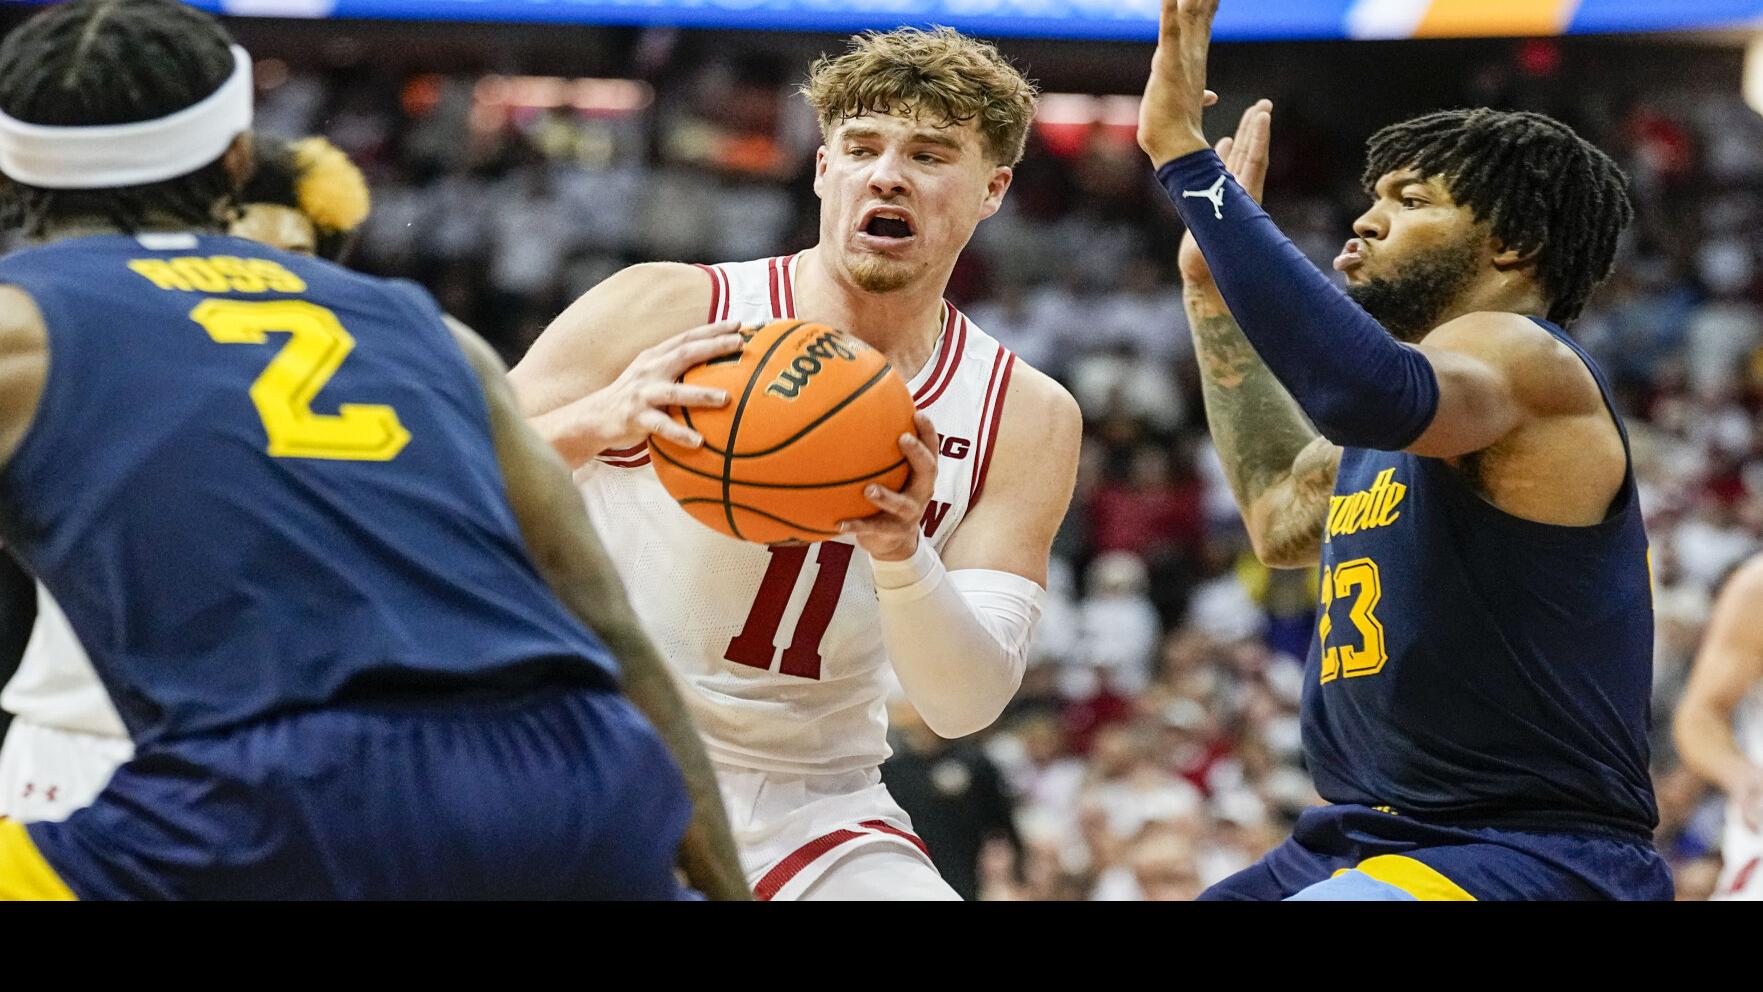 Max Klesmit scores 21 points as Wisconsin Badgers knock off No.3 Marquette